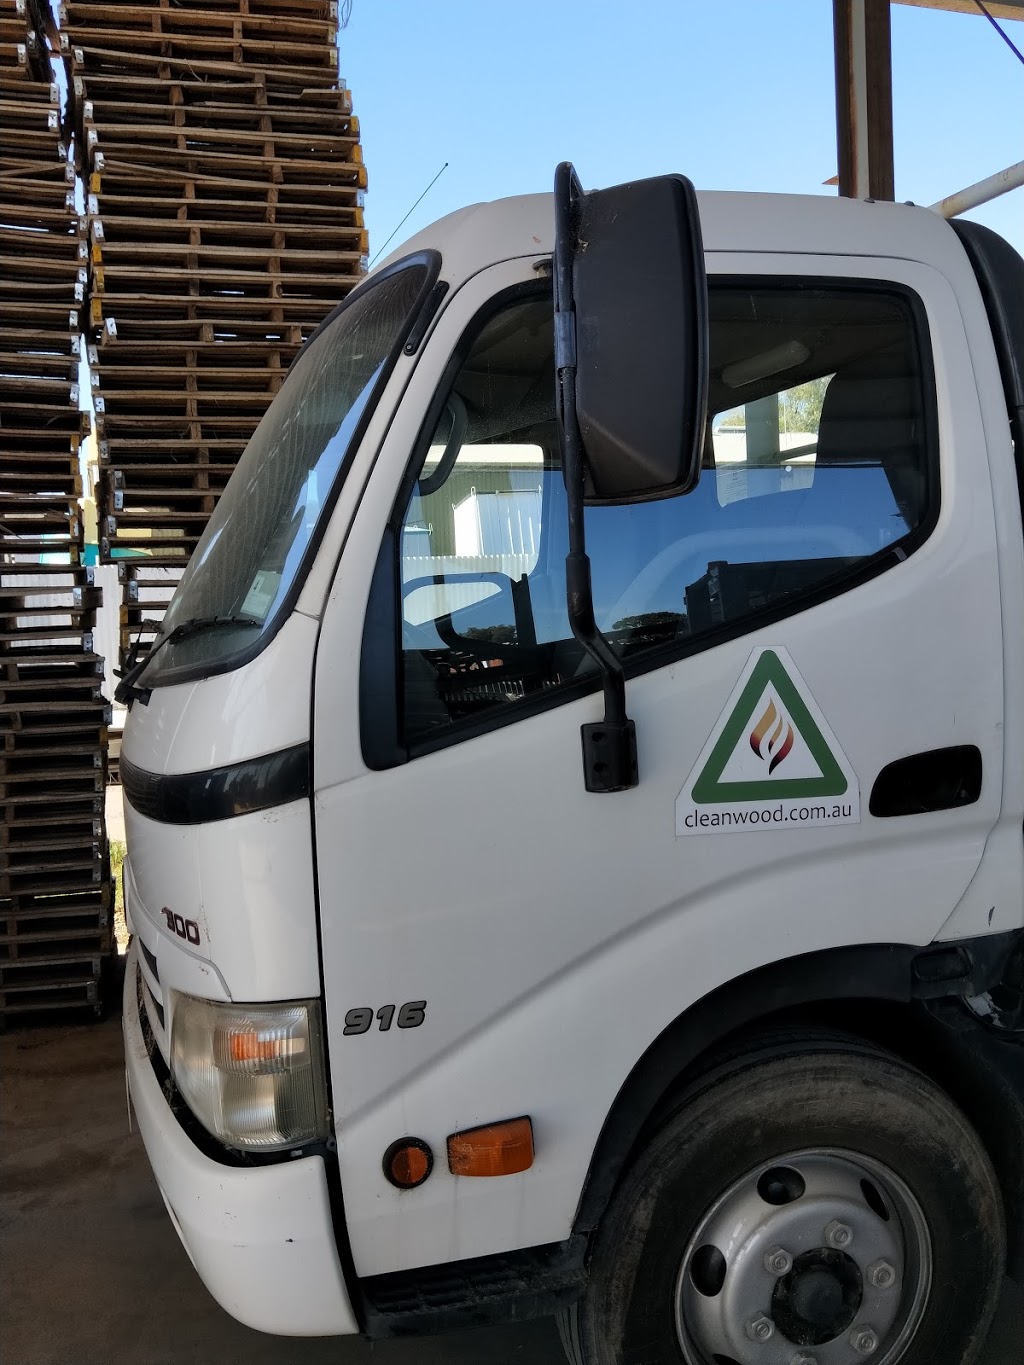 Cleanwood - Firewood, Eco Logs, Firewood Delivery | store | 25 Chapman Rd, Hackham SA 5163, Australia | 0478923720 OR +61 478 923 720